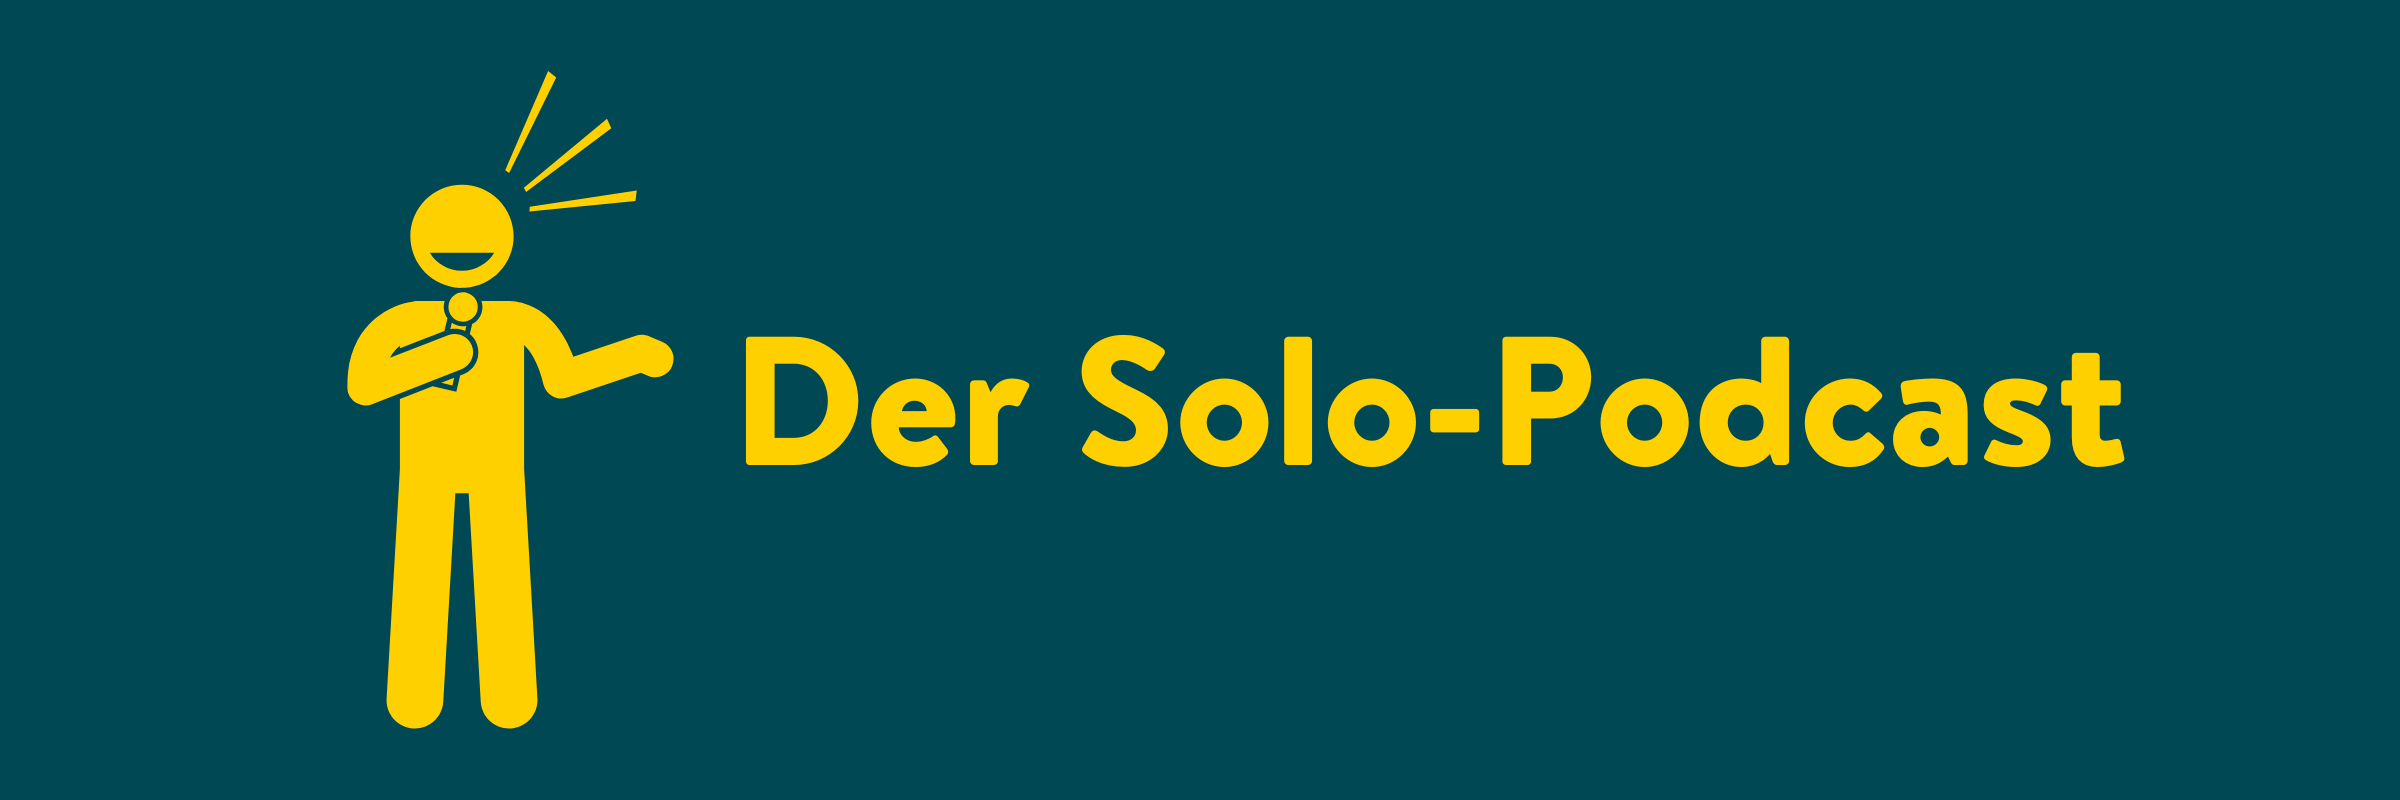 Der Solo-Podcast - podcast-format